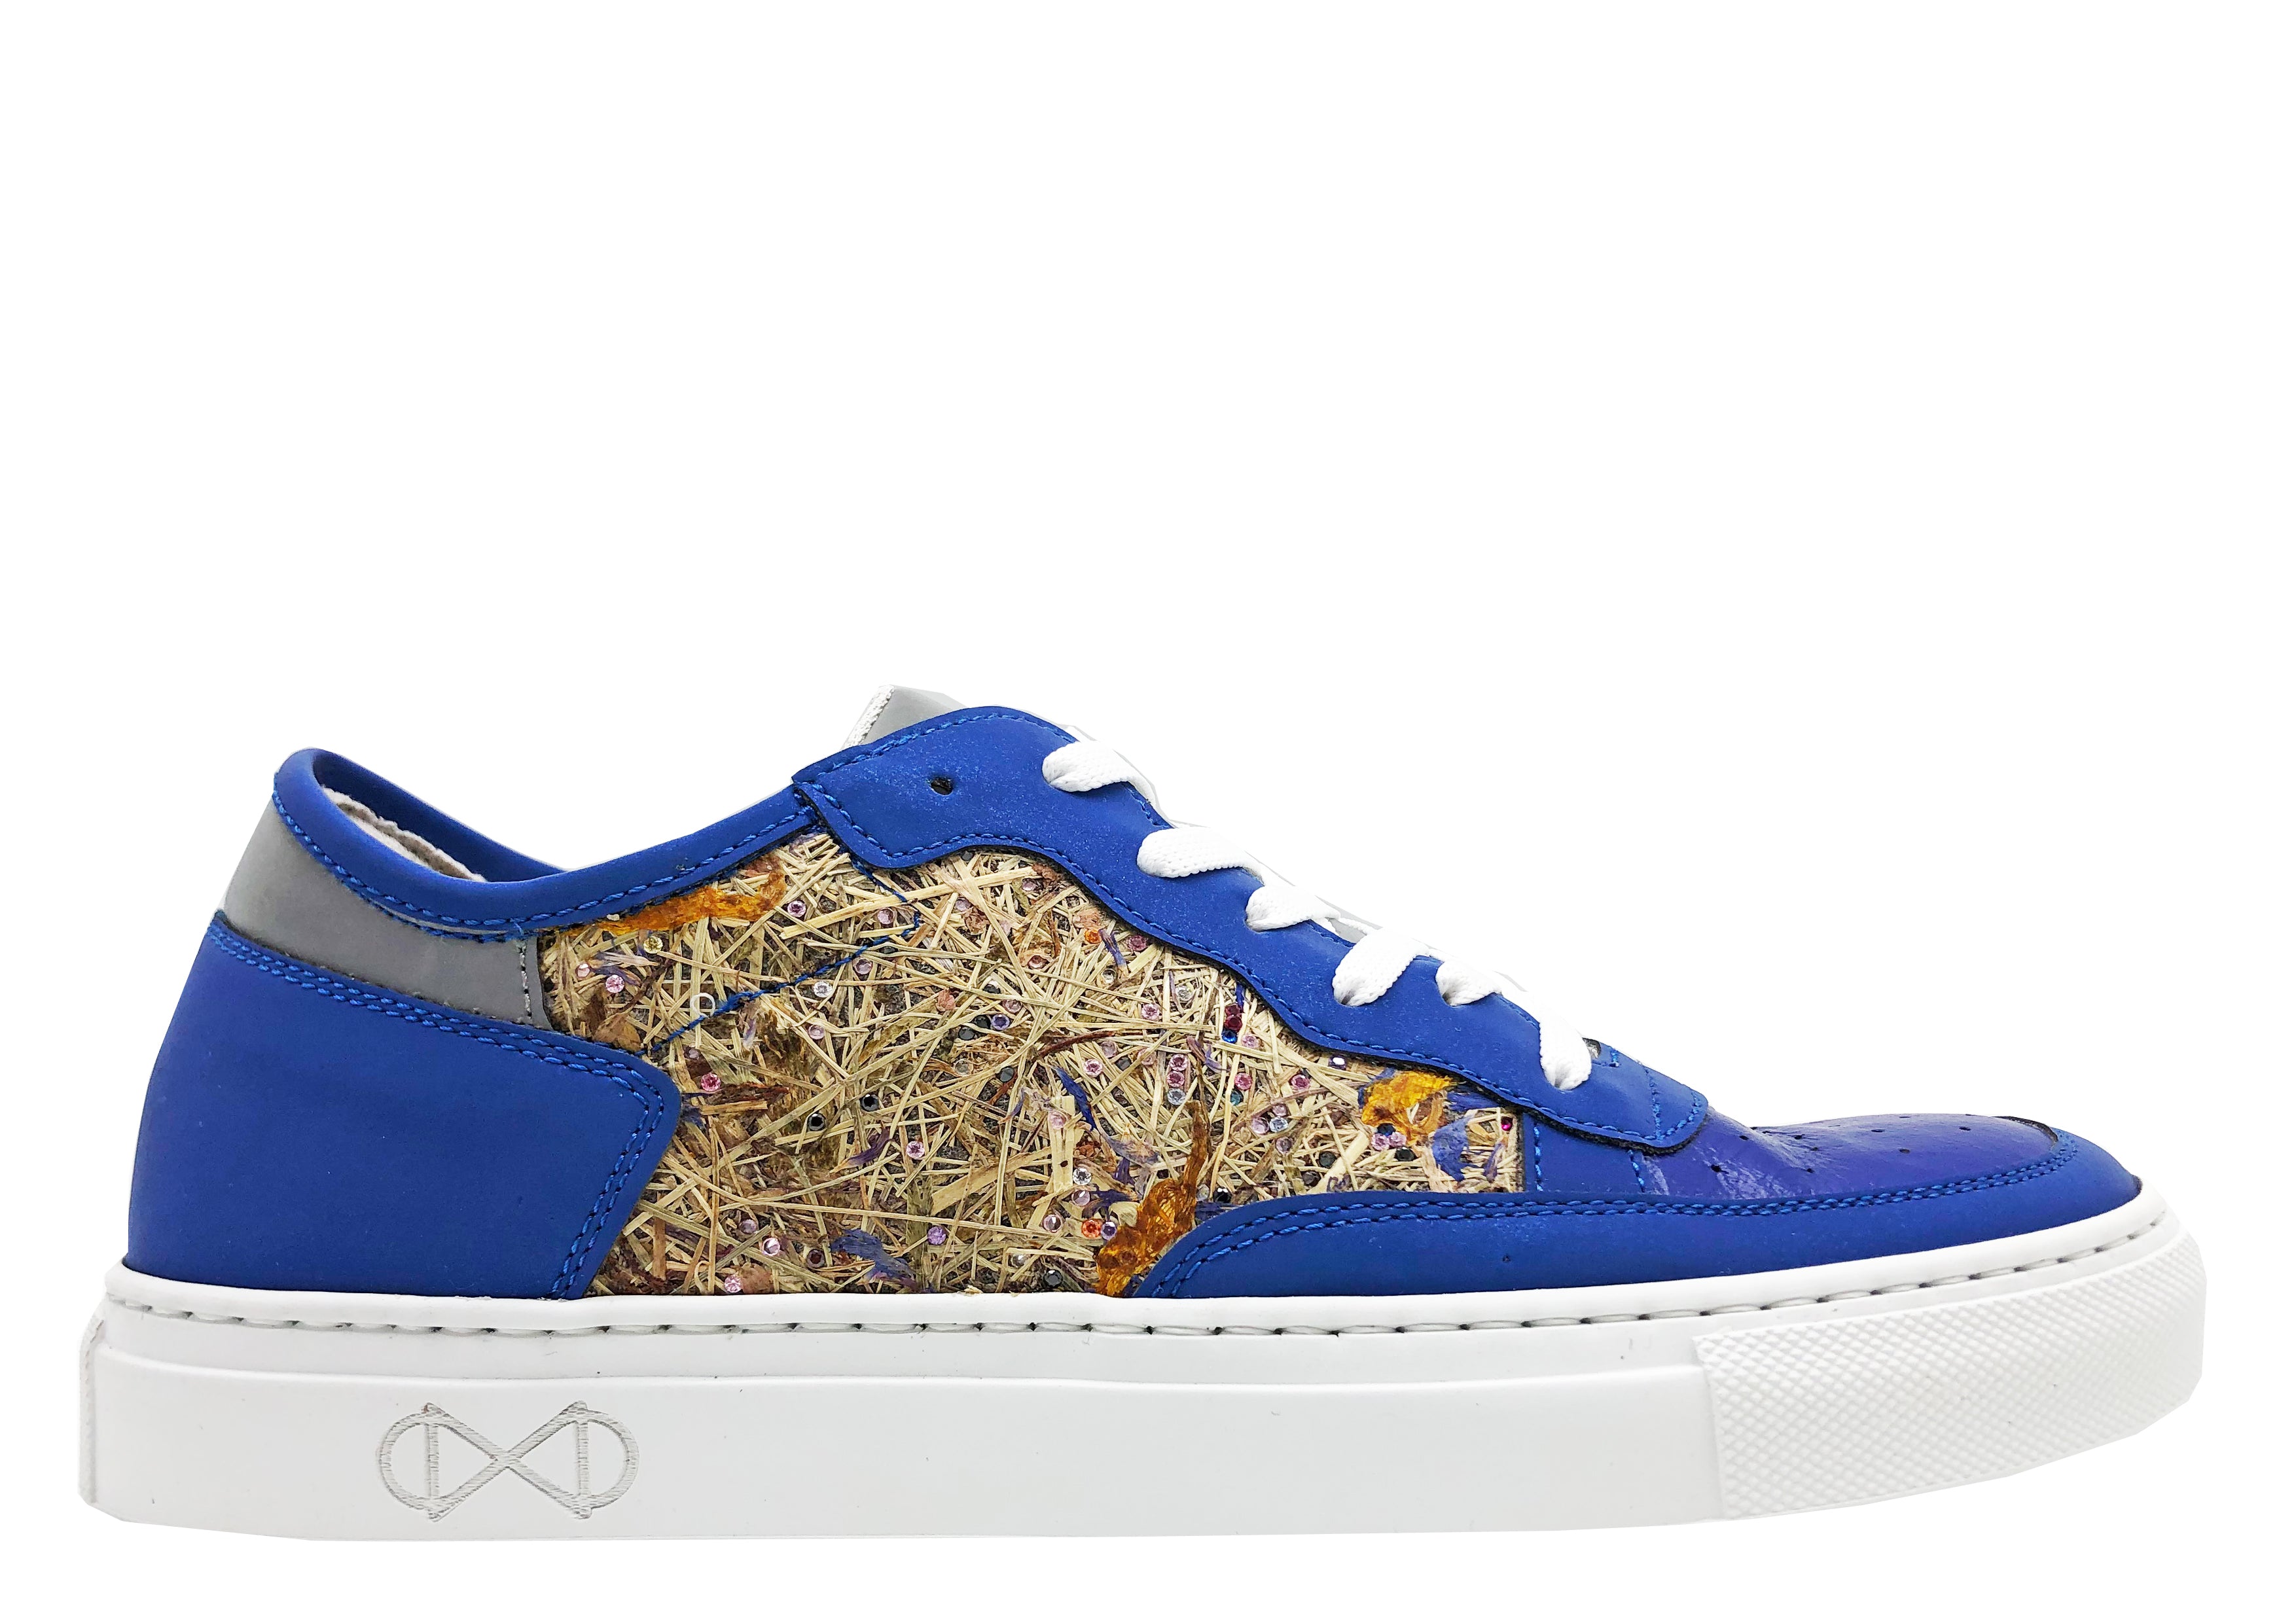 The most EXTRAORDINARY Sparkle You'll See SWAROVSKI #sneakers